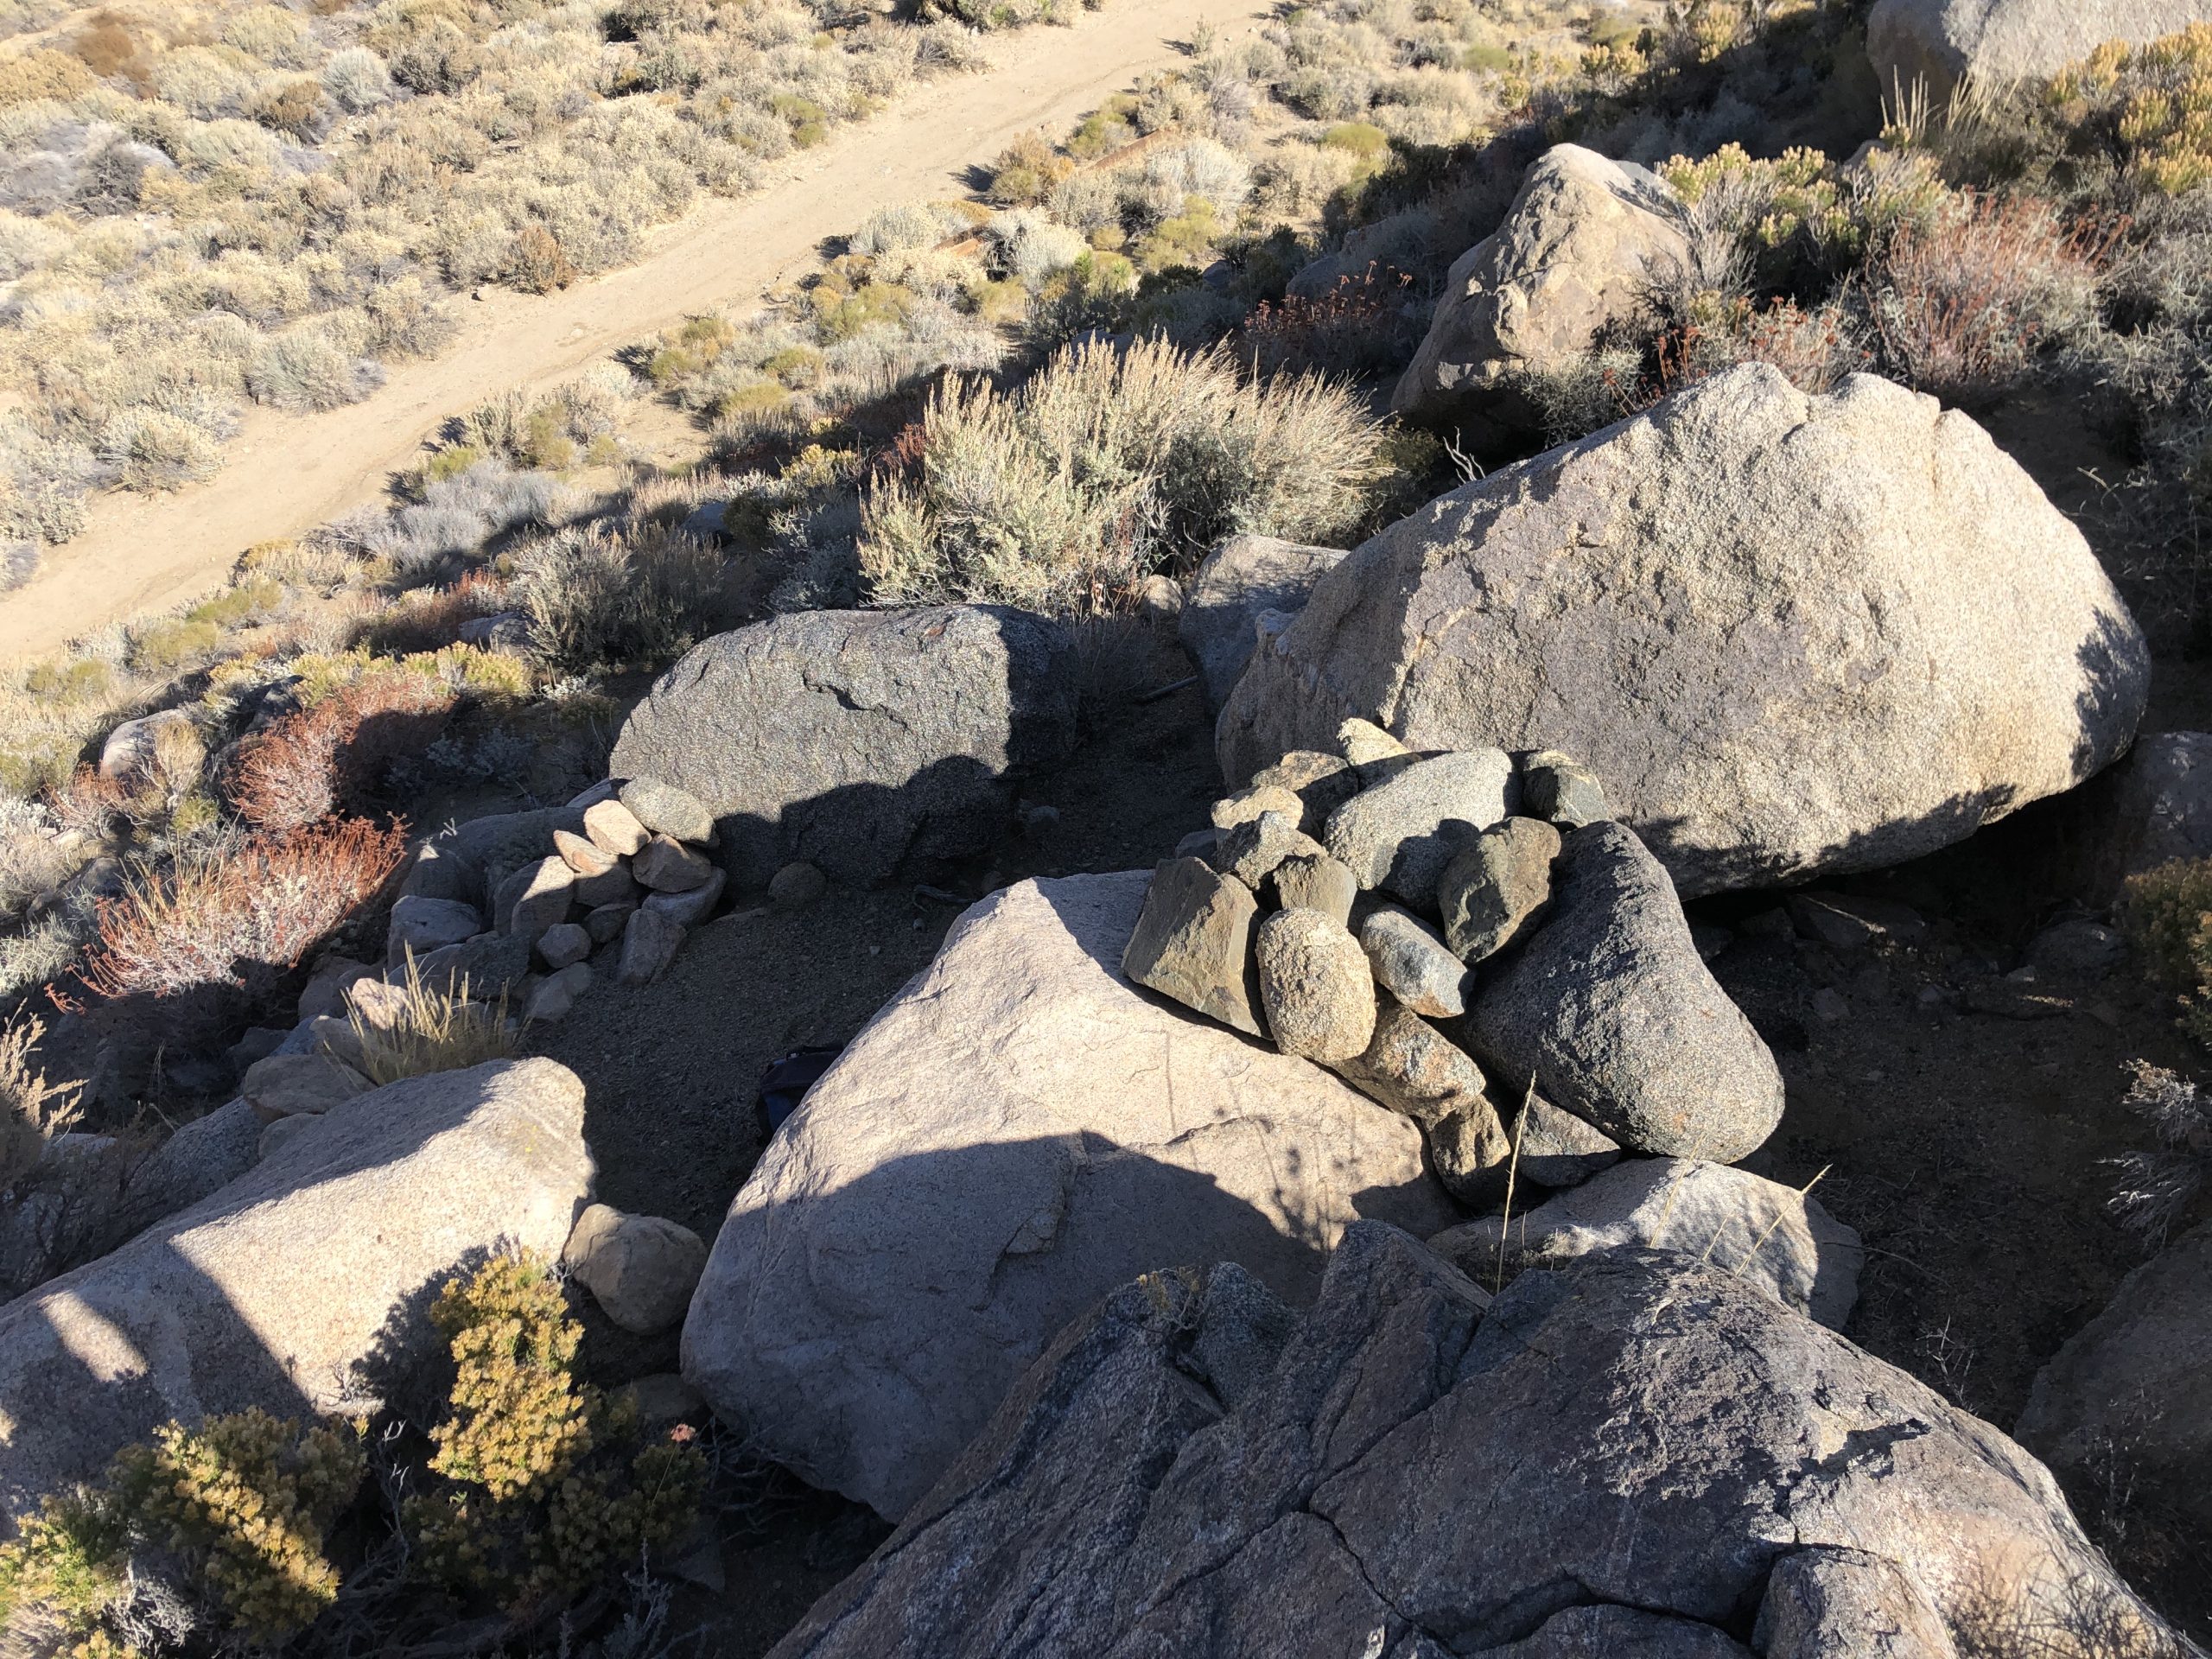 photo of large boulders with stacks of smaller rocks on top